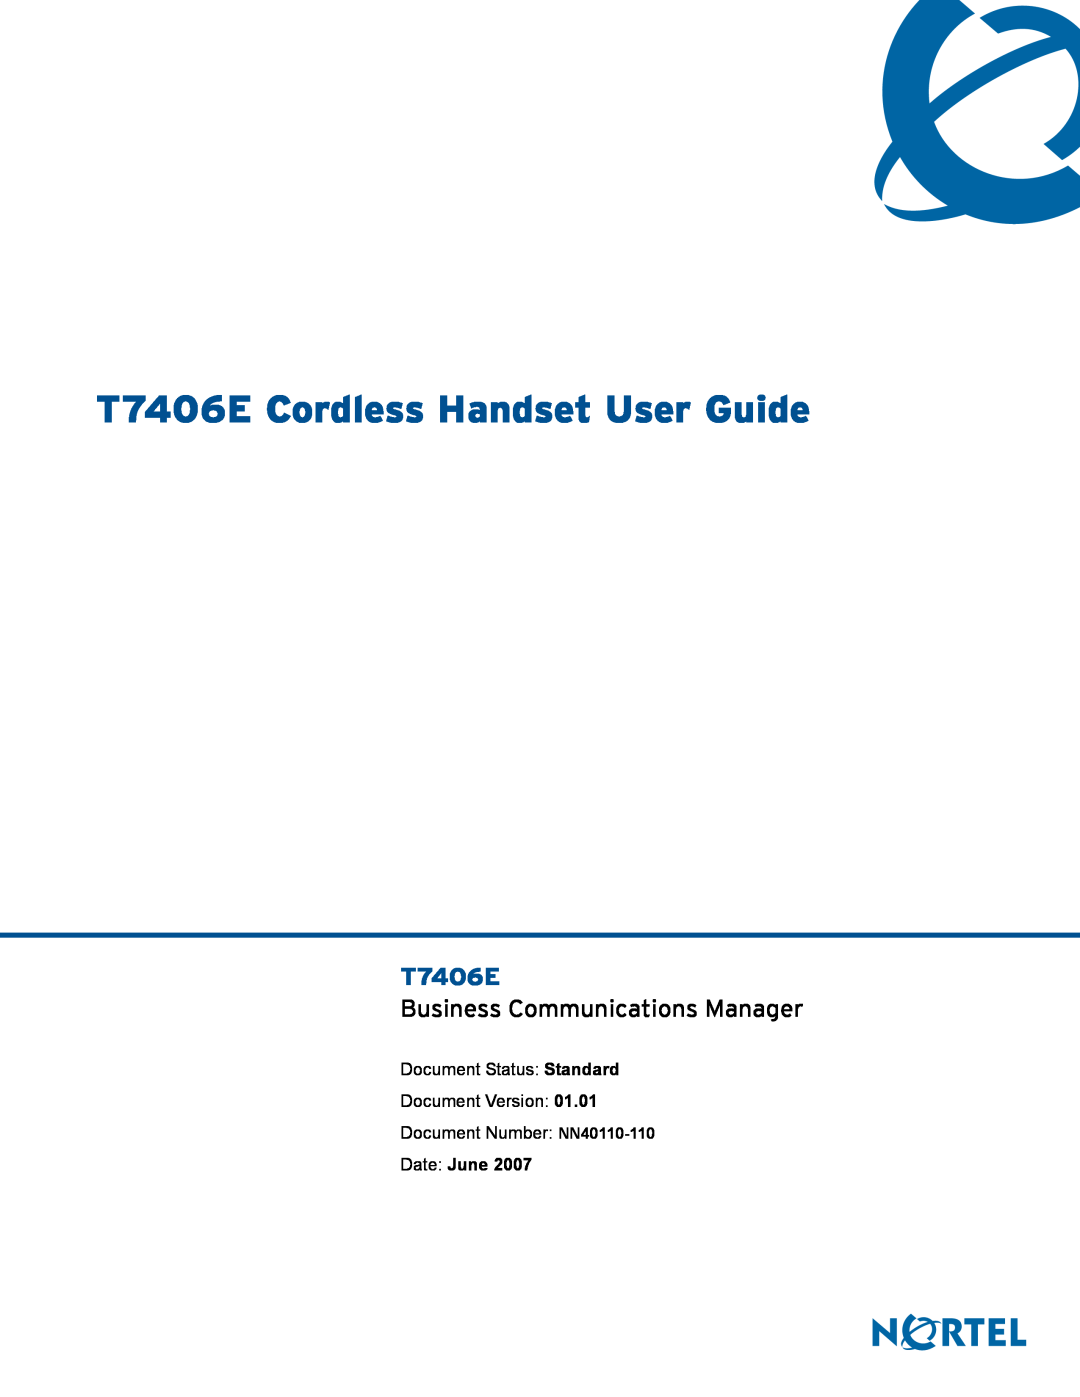 Nortel Networks manual T7406E Cordless Handset User Guide, Business Communications Manager, Date June 